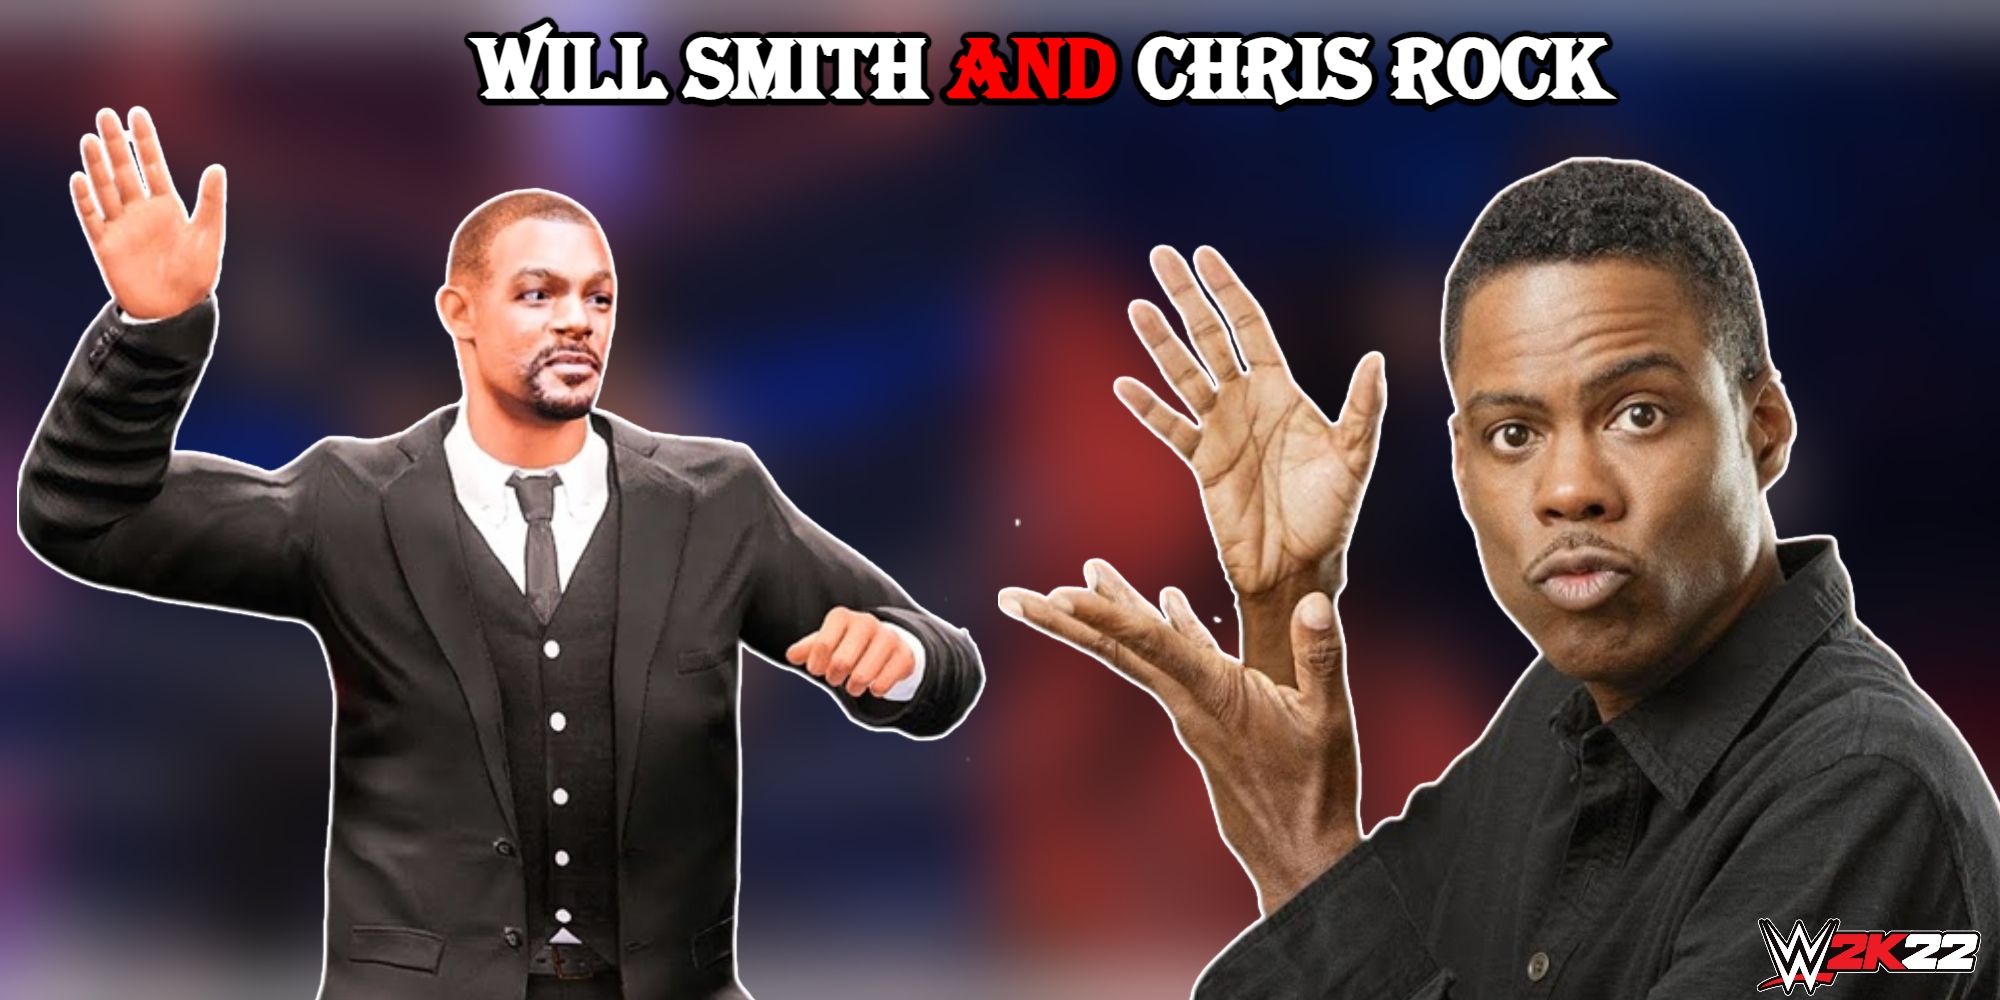 You are currently viewing Will Smith And Chris Rock In WWE 2K22